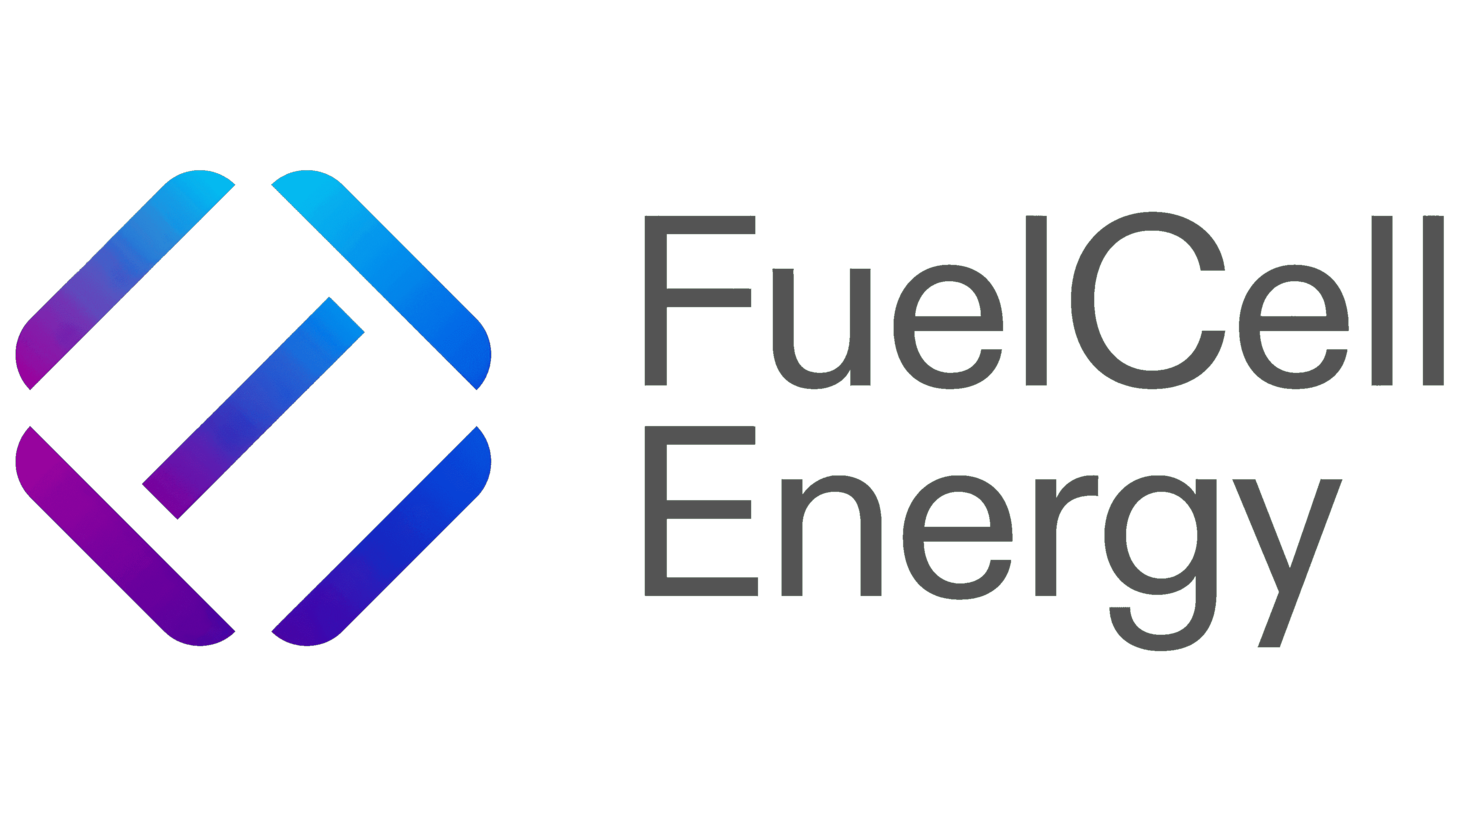 Fuelcell energy sign